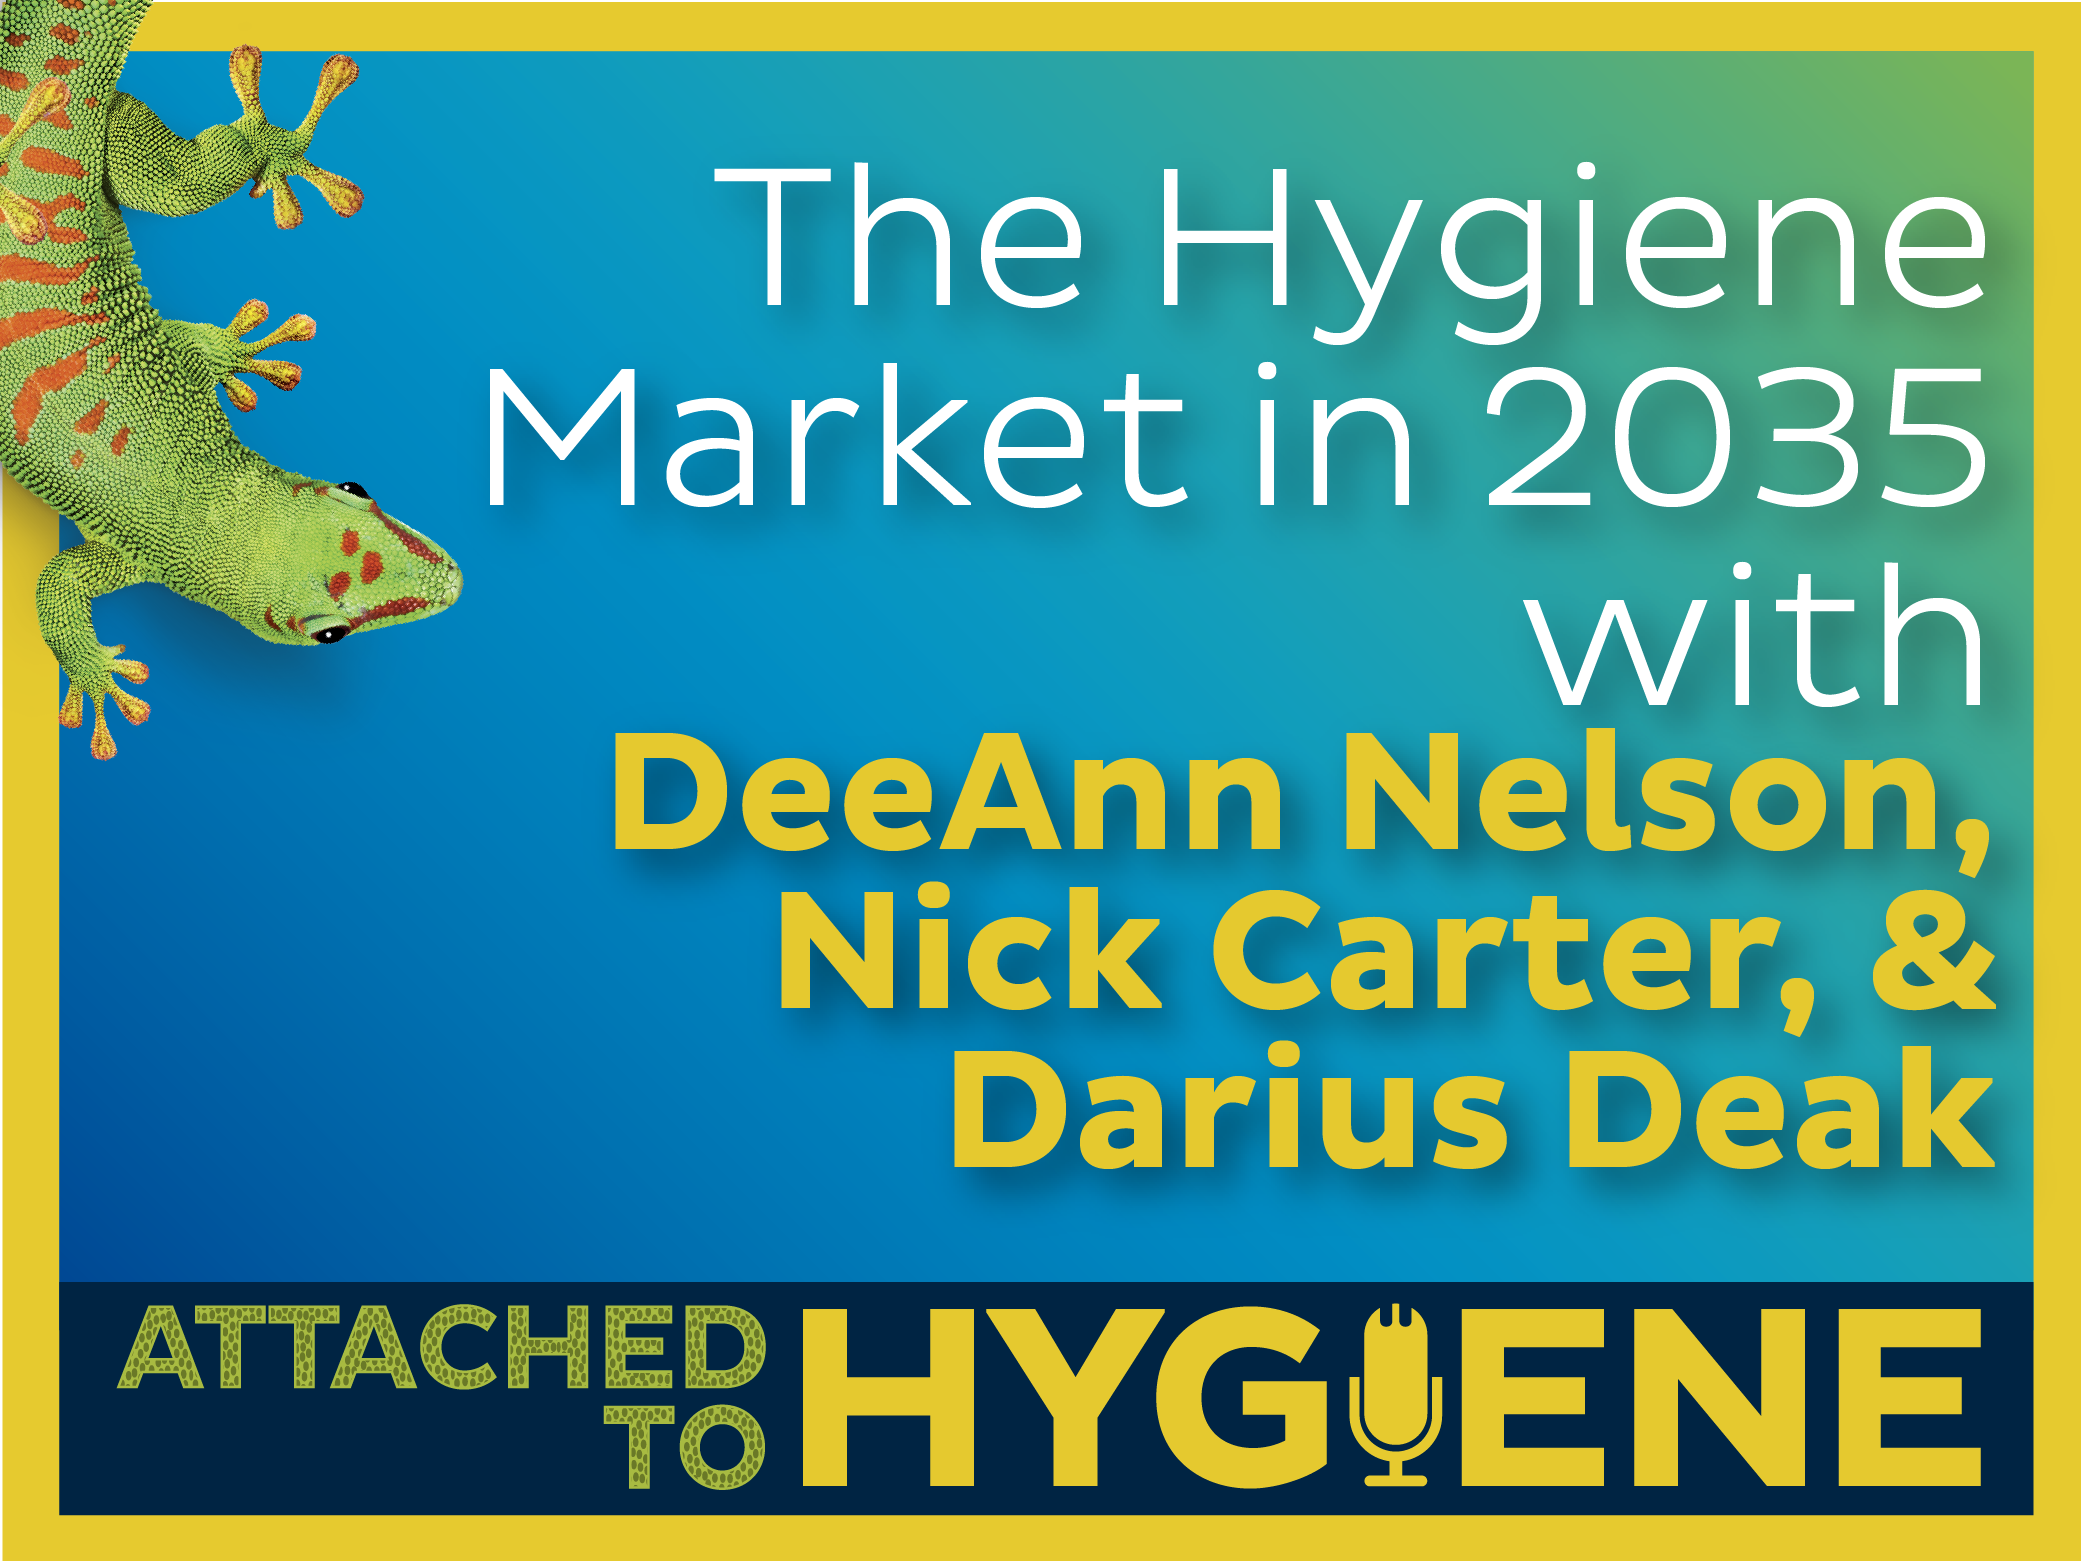 The-Hygiene-Industry-in-2035-with-DeeAnn-Nelson-Nick-Carter-and-Darius-Deak